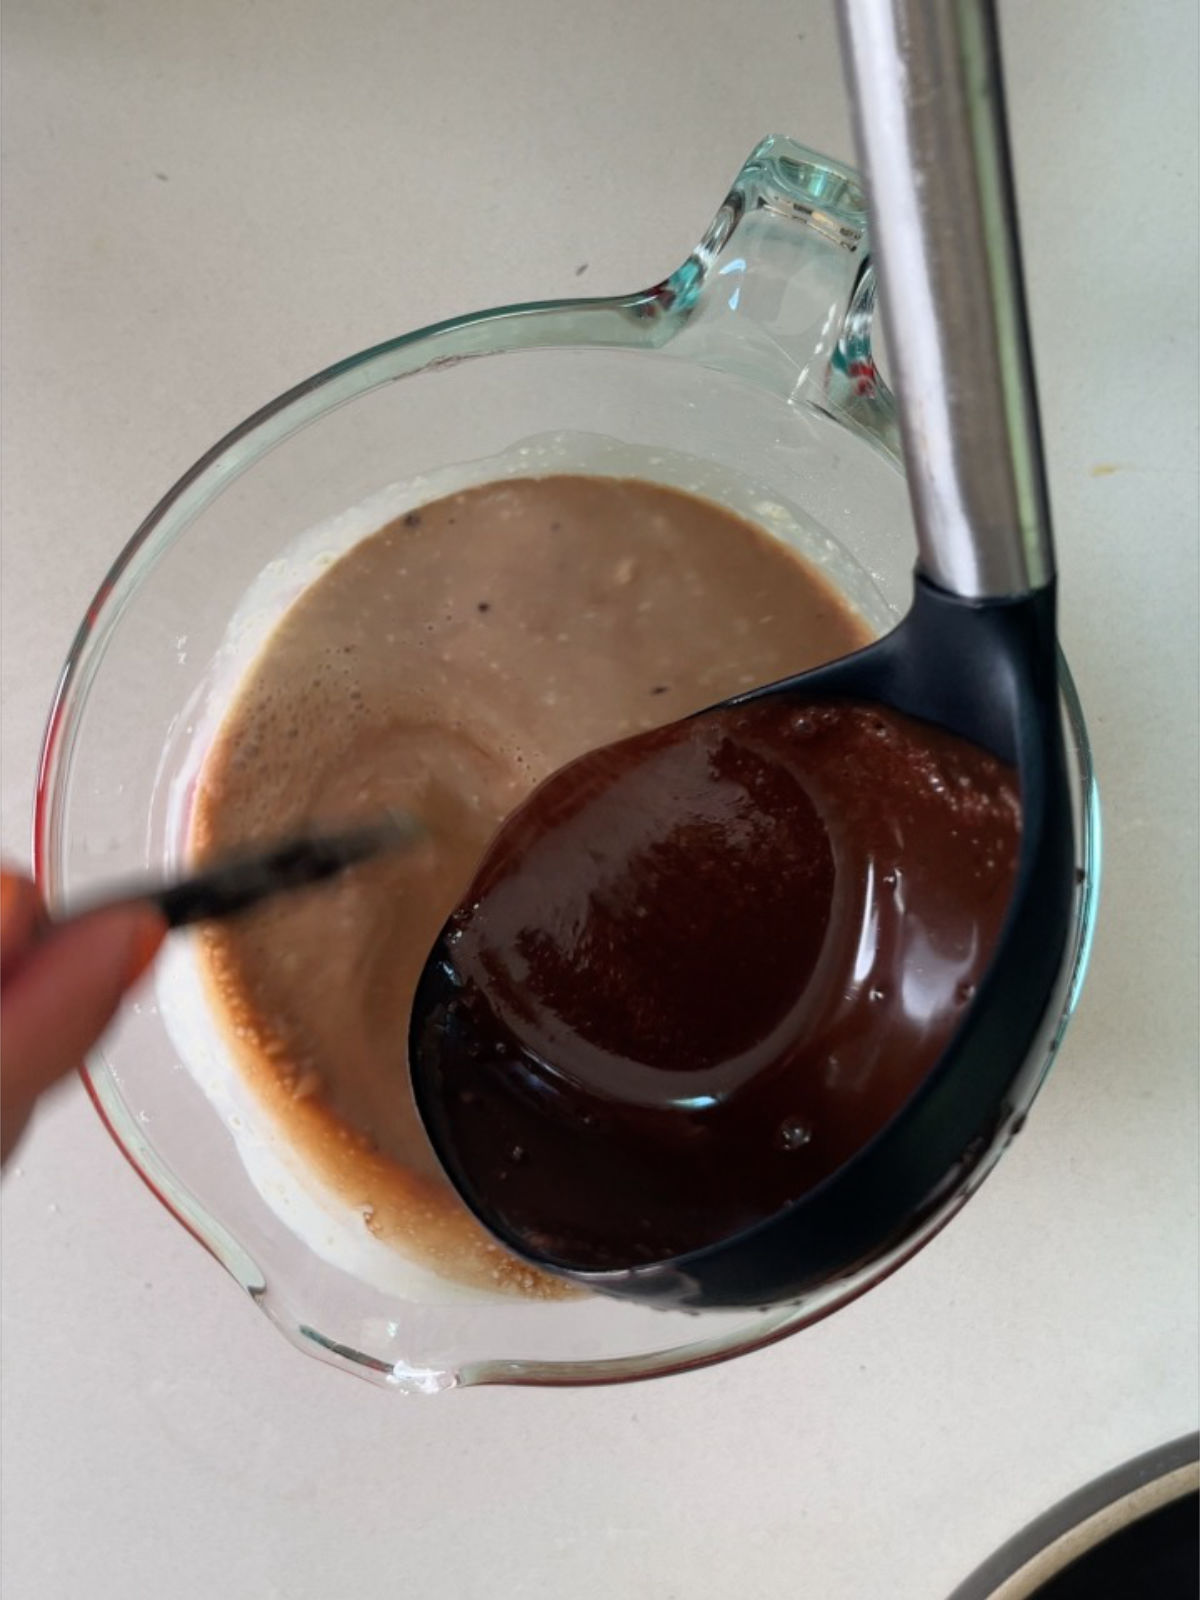 Black and metal ladle pouring chocolate liquid into a glass measuring cup creating a lighter brown liquid in the cup.